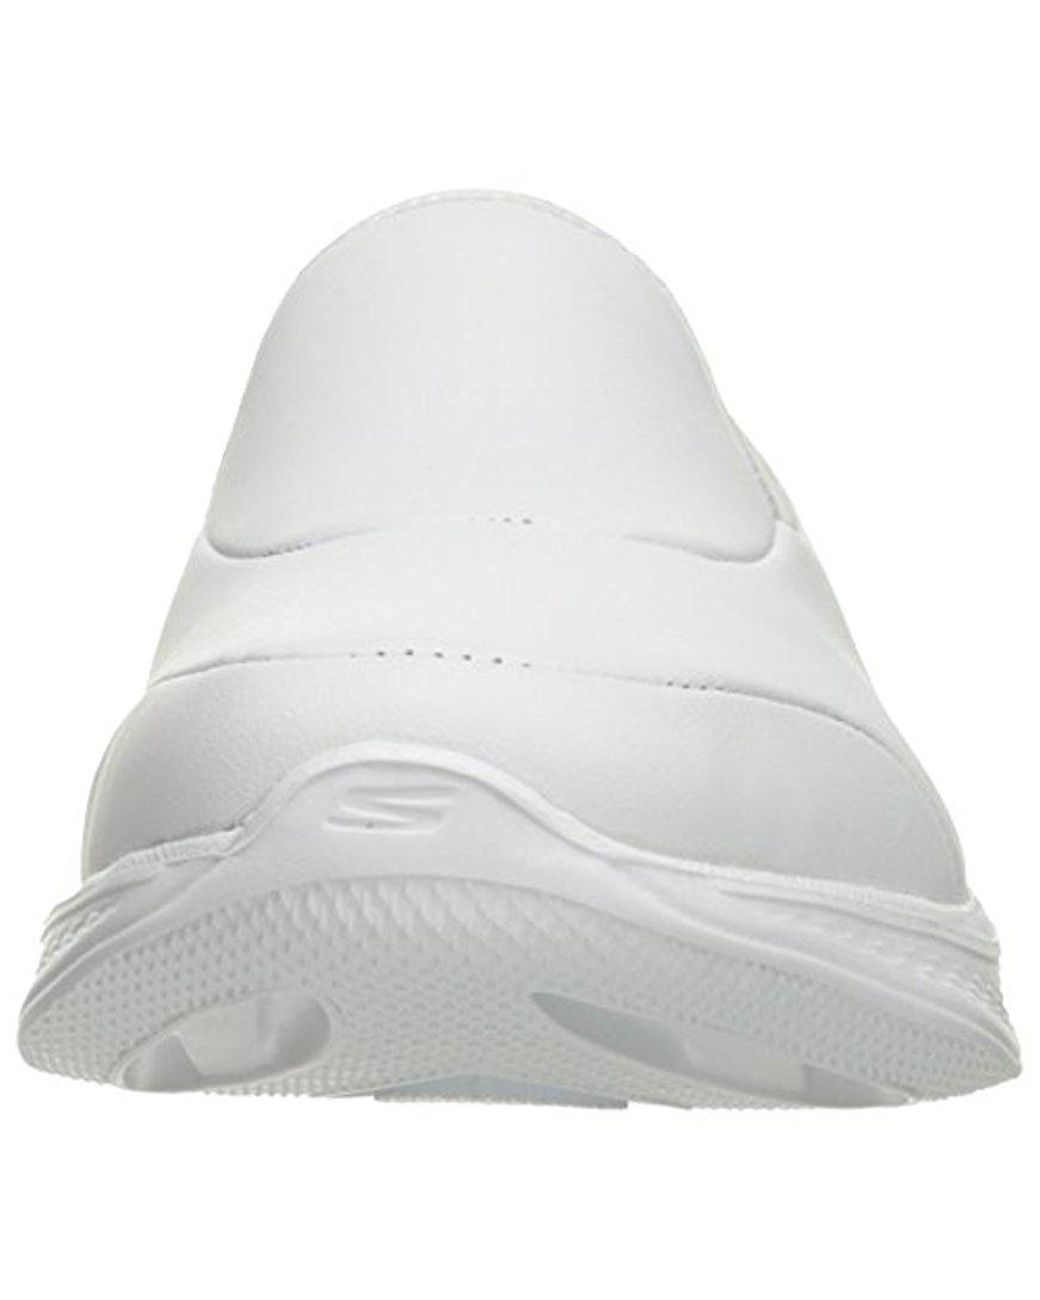 Skechers Leather Performance Go Walk 4 Upscale in White | Lyst